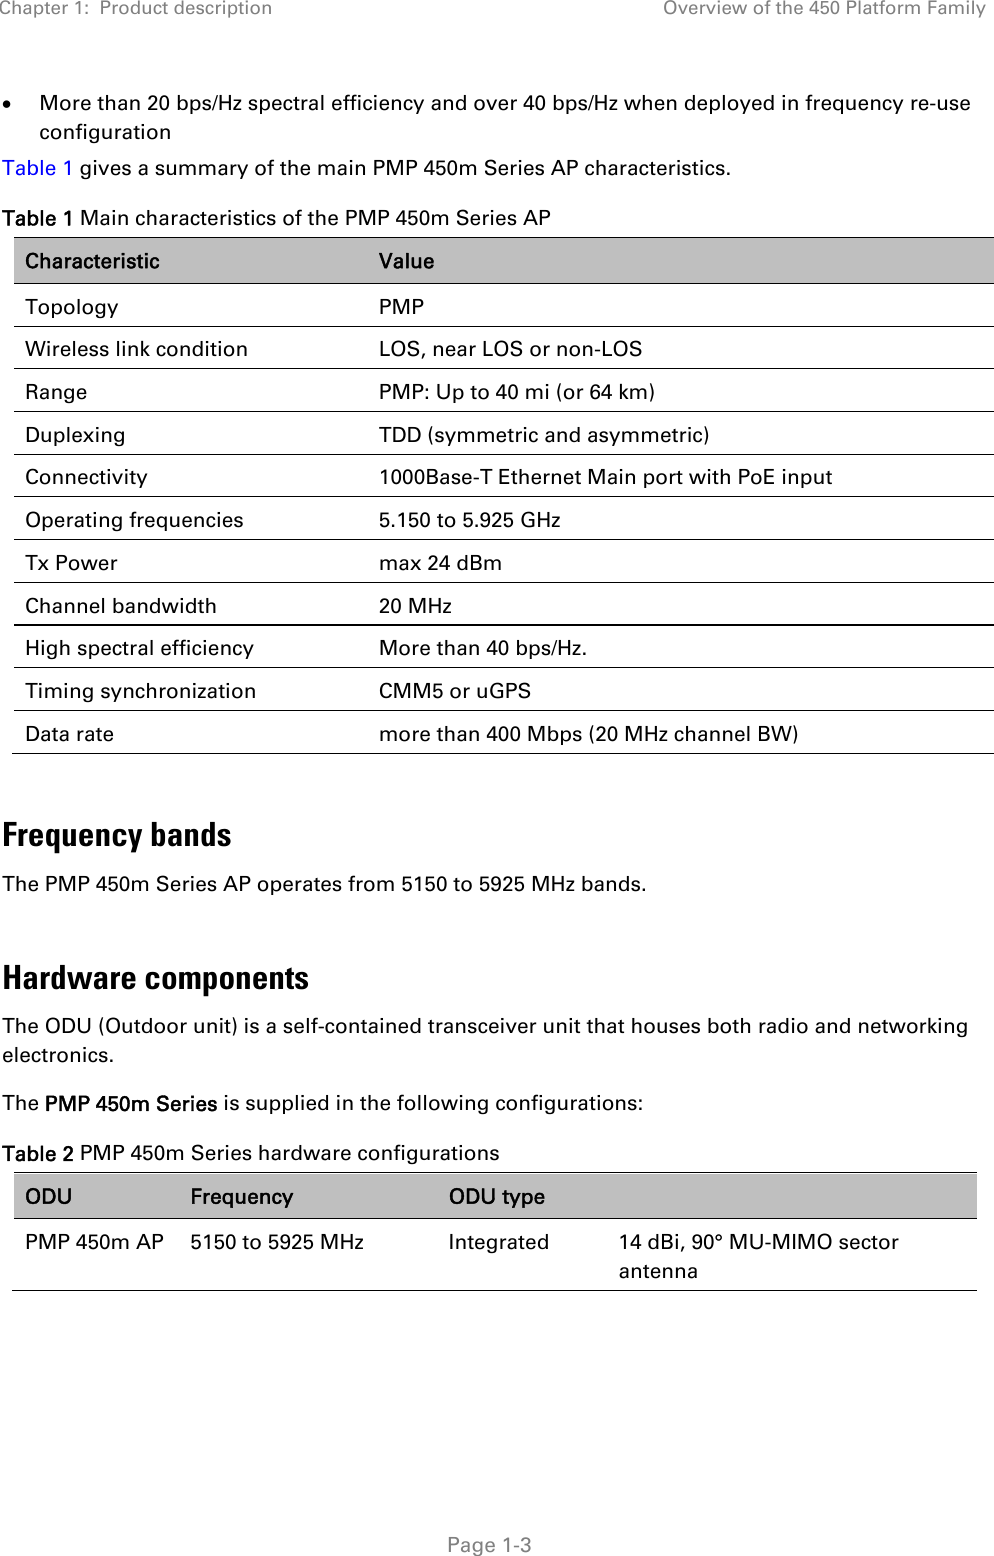 Chapter 1:  Product description  Overview of the 450 Platform Family   Page 1-3  More than 20 bps/Hz spectral efficiency and over 40 bps/Hz when deployed in frequency re-use configuration Table 1 gives a summary of the main PMP 450m Series AP characteristics. Table 1 Main characteristics of the PMP 450m Series AP Characteristic  Value Topology PMP Wireless link condition  LOS, near LOS or non-LOS Range  PMP: Up to 40 mi (or 64 km) Duplexing  TDD (symmetric and asymmetric) Connectivity  1000Base-T Ethernet Main port with PoE input Operating frequencies  5.150 to 5.925 GHz Tx Power  max 24 dBm Channel bandwidth  20 MHz High spectral efficiency  More than 40 bps/Hz. Timing synchronization  CMM5 or uGPS Data rate  more than 400 Mbps (20 MHz channel BW)  Frequency bands The PMP 450m Series AP operates from 5150 to 5925 MHz bands.  Hardware components The ODU (Outdoor unit) is a self-contained transceiver unit that houses both radio and networking electronics.  The PMP 450m Series is supplied in the following configurations: Table 2 PMP 450m Series hardware configurations ODU  Frequency  ODU type   PMP 450m AP  5150 to 5925 MHz  Integrated  14 dBi, 90° MU-MIMO sector antenna 